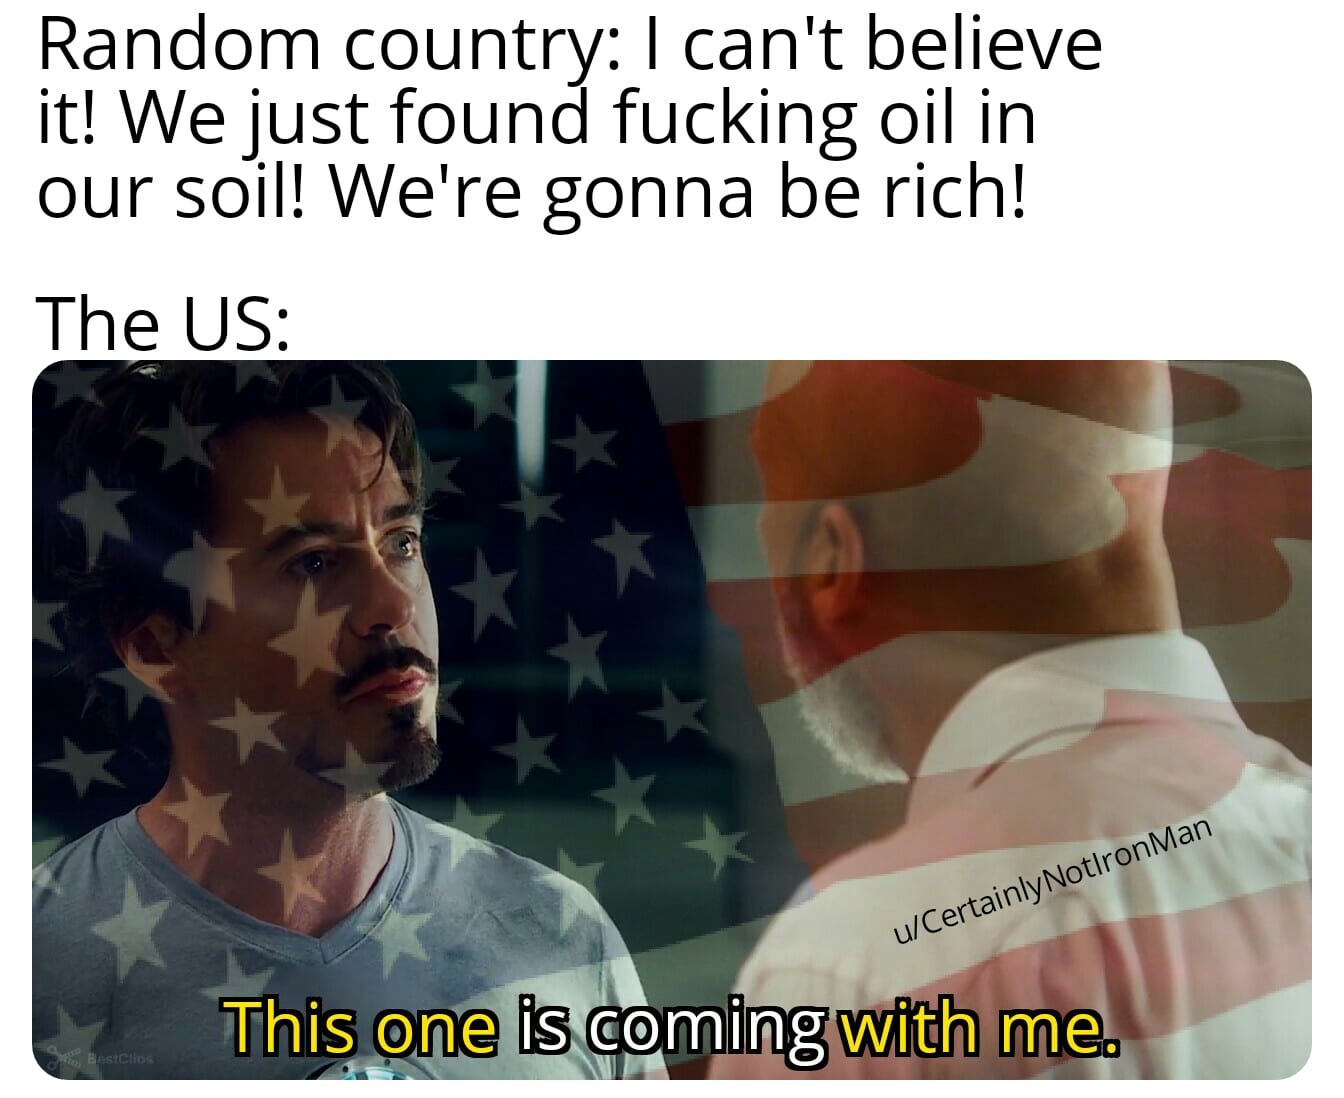 Thanos,  Avengers Memes Thanos,  text: Random country: I can't believe it! We just found fucking oil in our soil! We're gonna be rich! The US: UI 00 This one is coming 